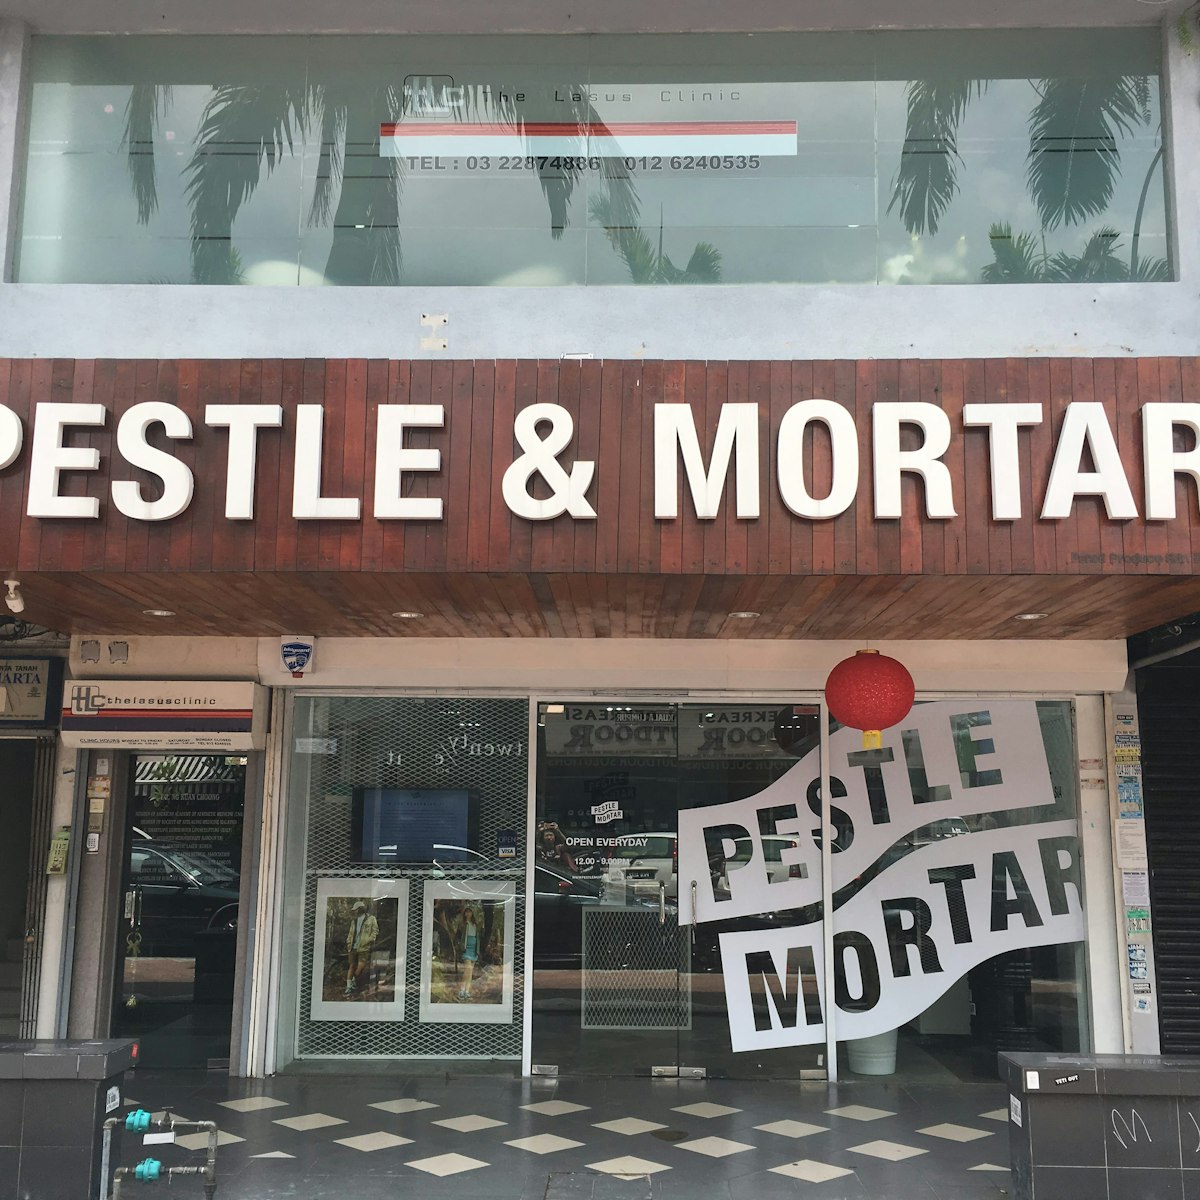 Homegrown clothing brand Pestle and Mortar is famous for their slogan tees